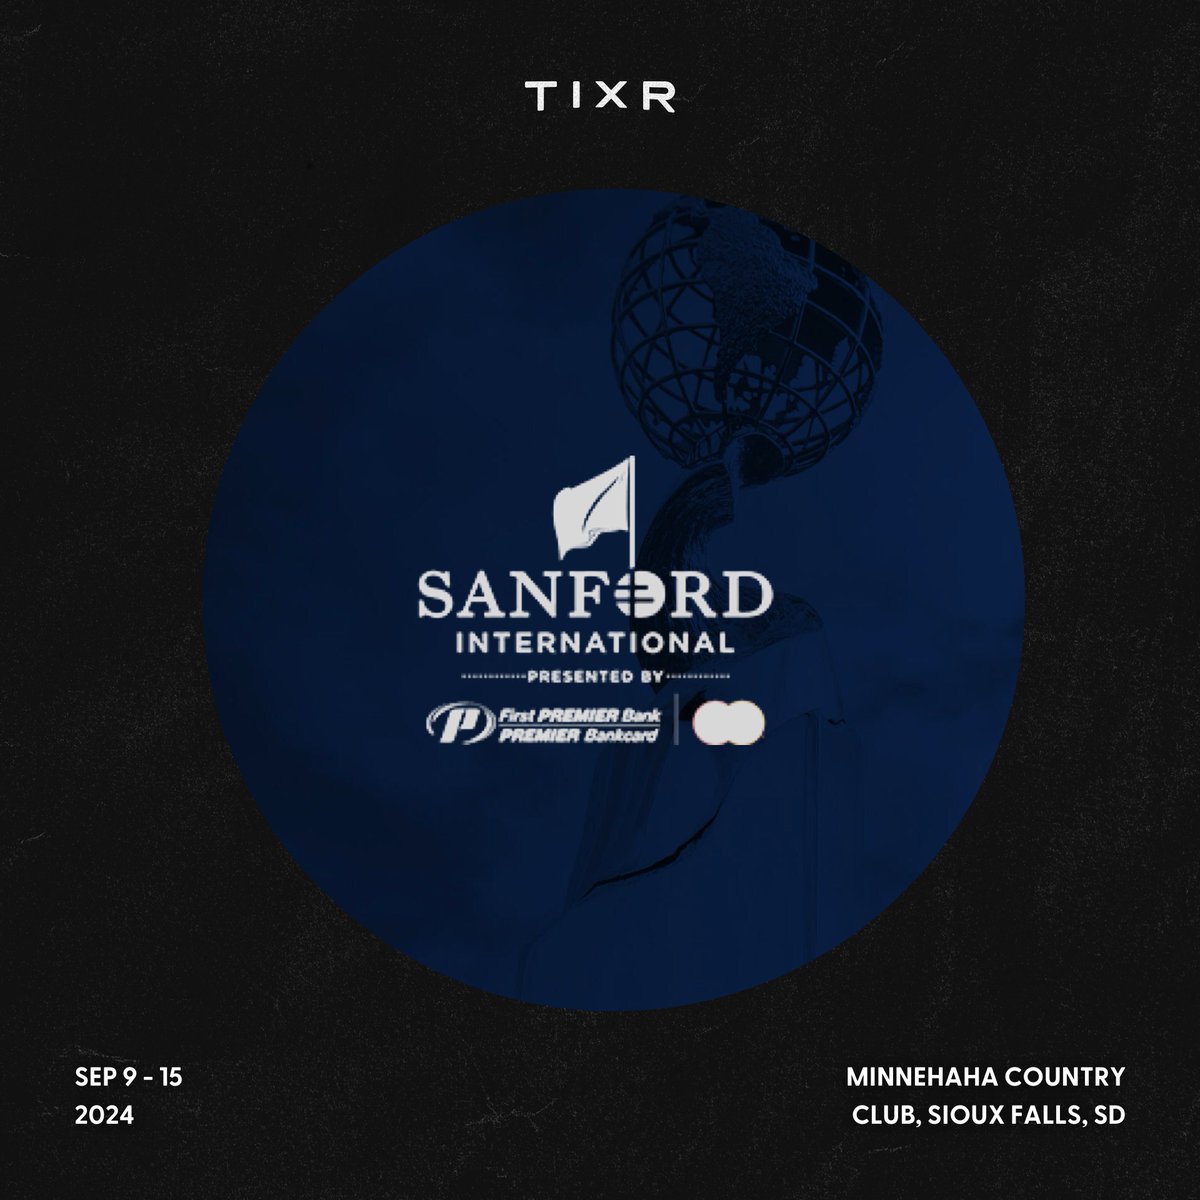 Golf legends are headed to Sioux Falls, South Dakota for the @SanfordIntl this fall! Weekend passes, food & beverage and merch packages, and hospitality offerings are all available on Tixr. tixr.com/groups/sanford…